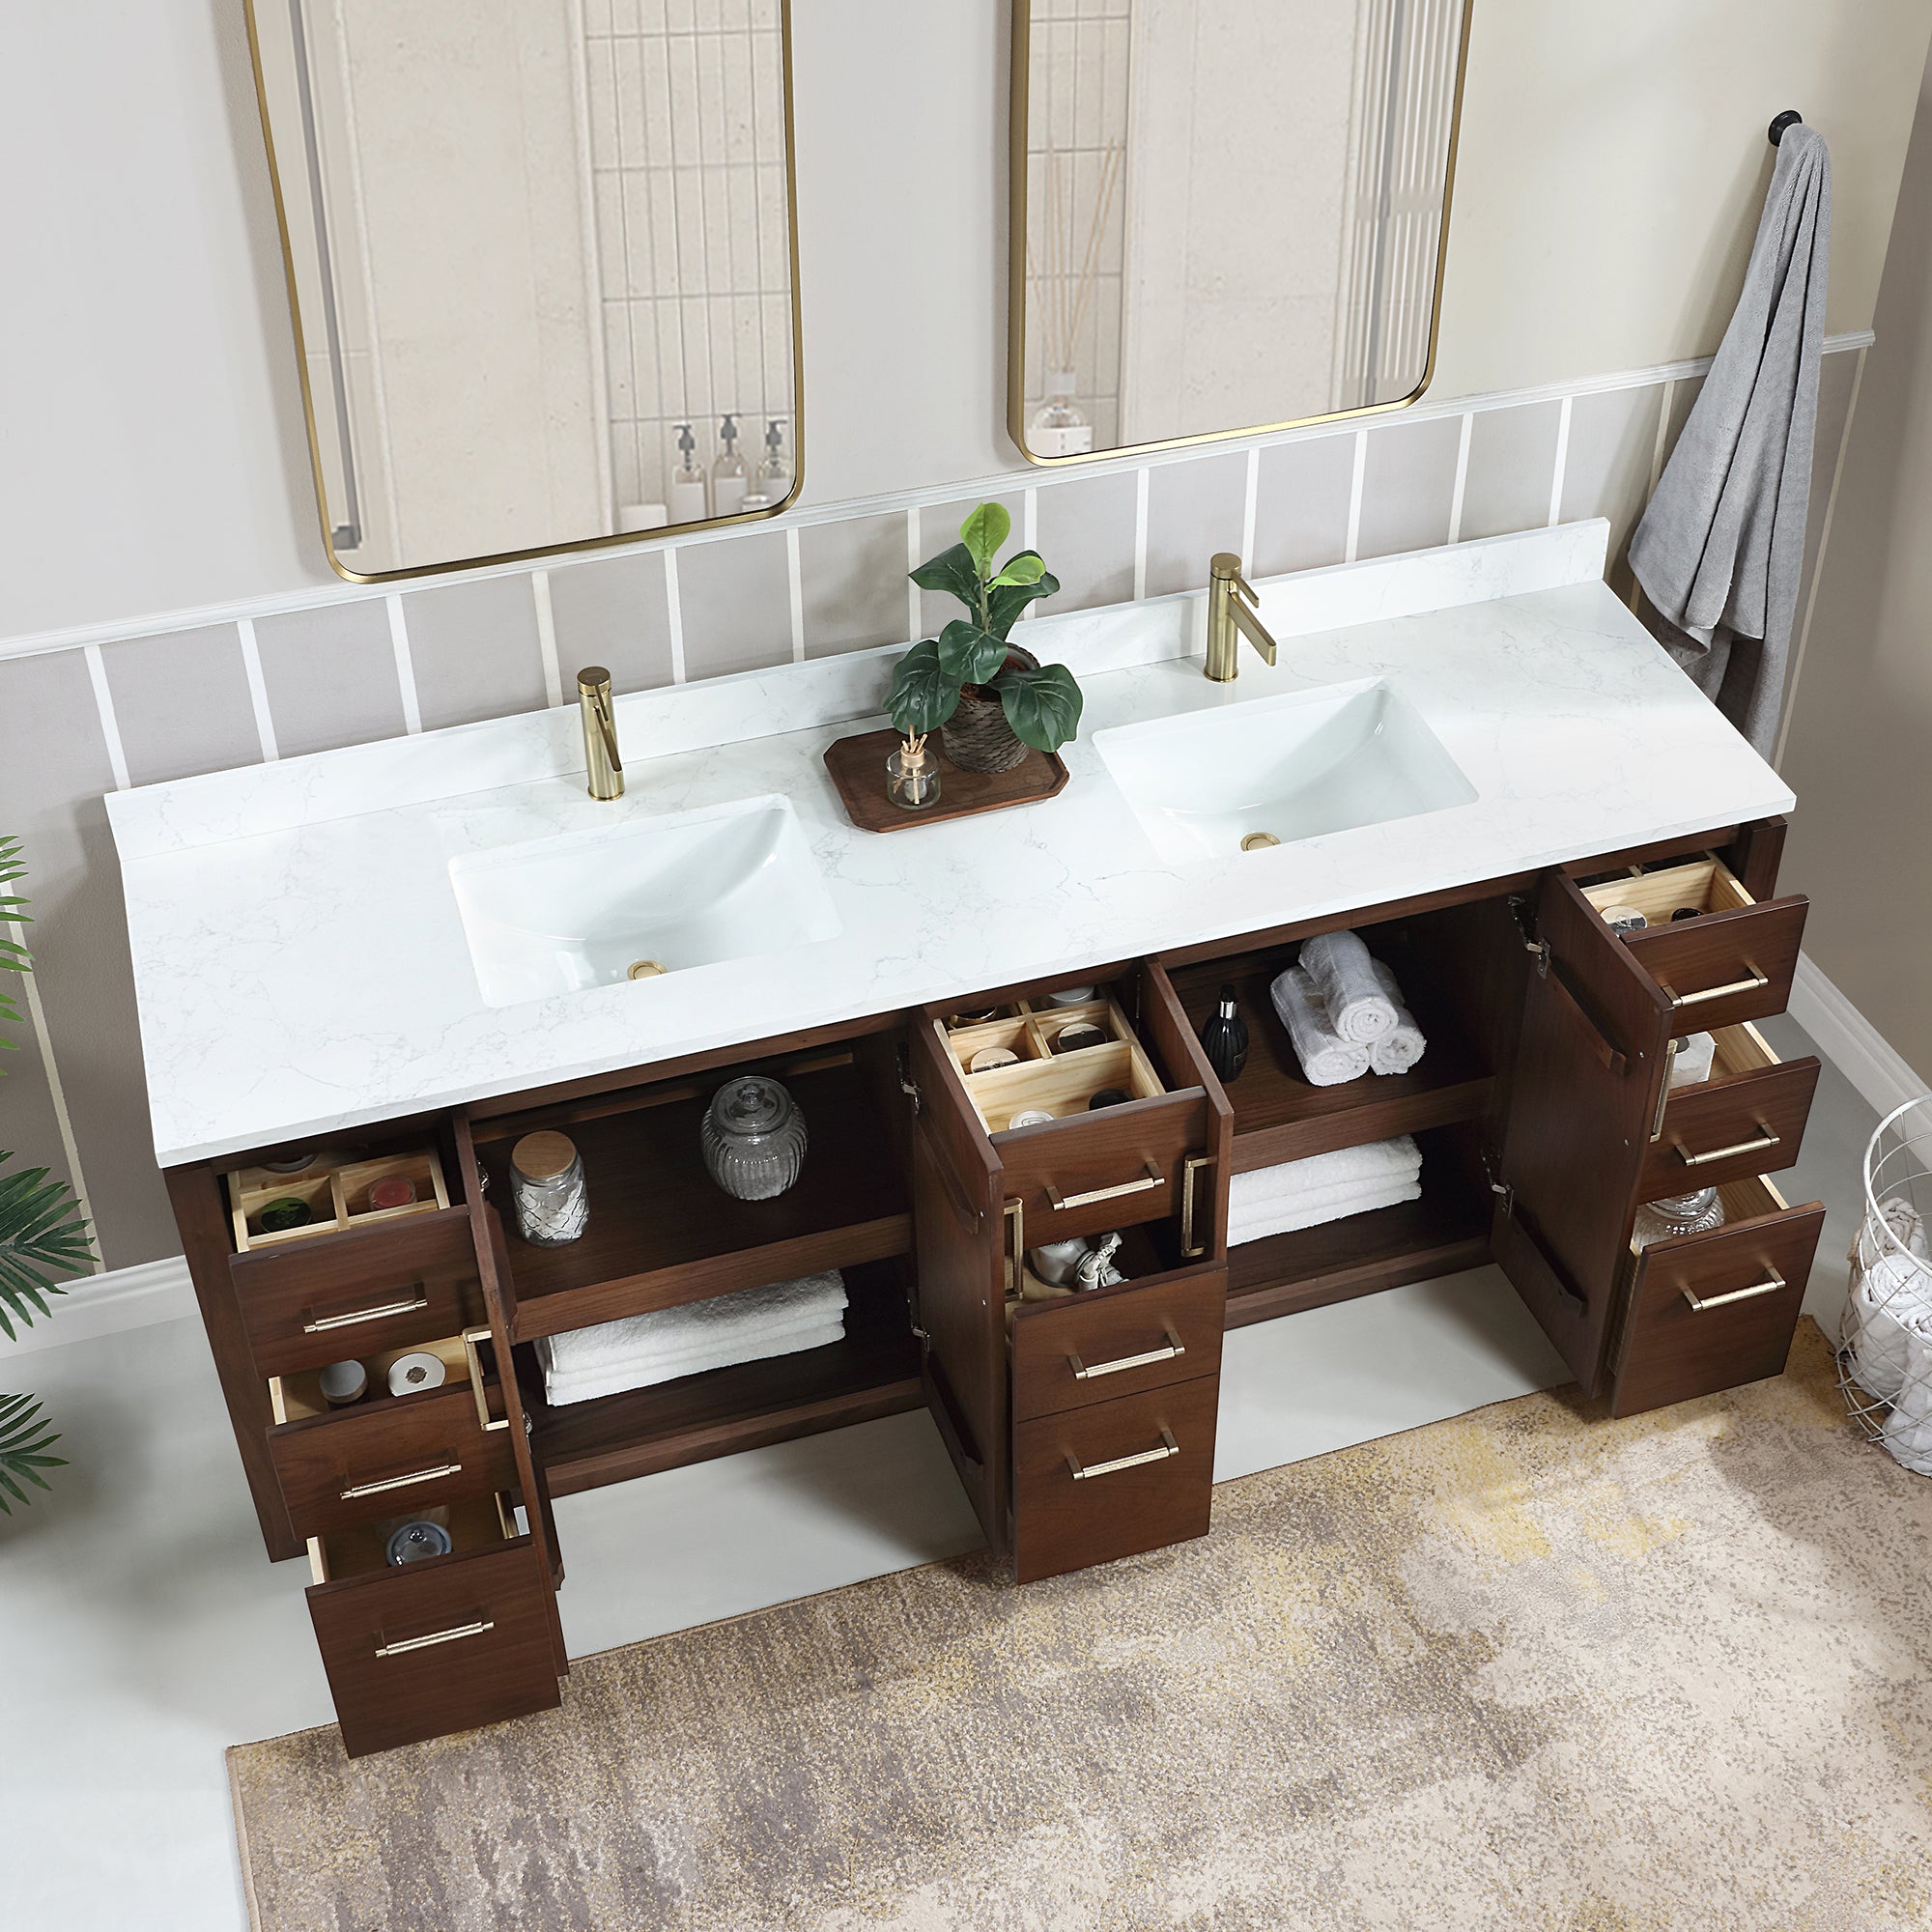 San 84" Free-standing Double Bath Vanity in Natural Walnut with White Grain Composite Stone Top